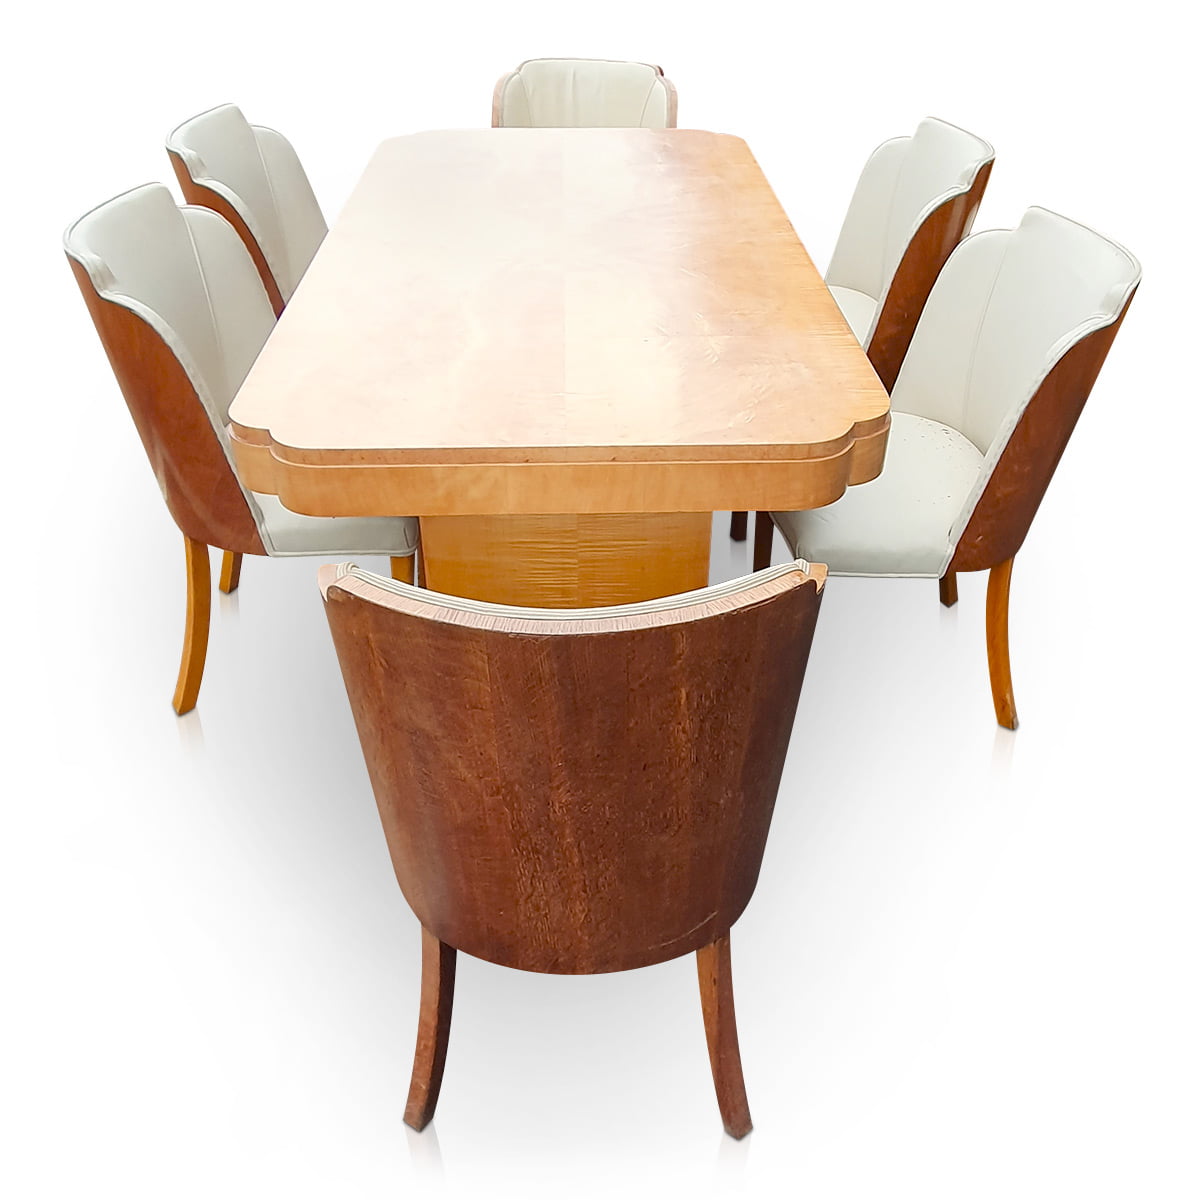 Epstein Art Deco U-base Dining Table in maple and burr maple veneers